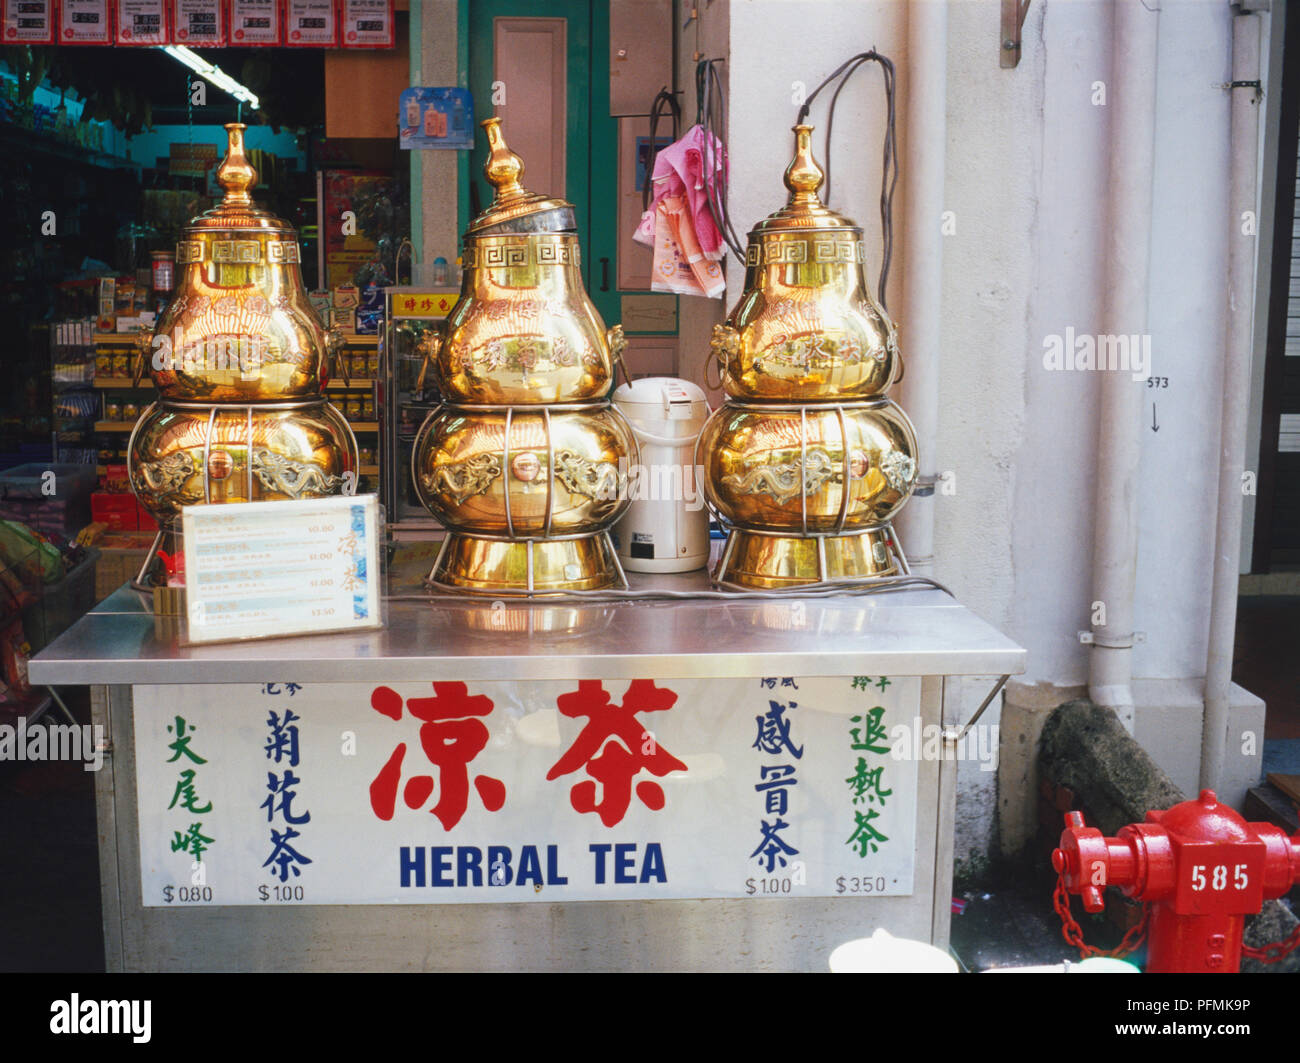 Singapore, Chinatown, Temple Street, decorative herbal tea dispensers, gold coloured metal decorated with Chinese script and dragons, lid loosely placed on central dispenser, standing on metal box, shop in background. Stock Photo